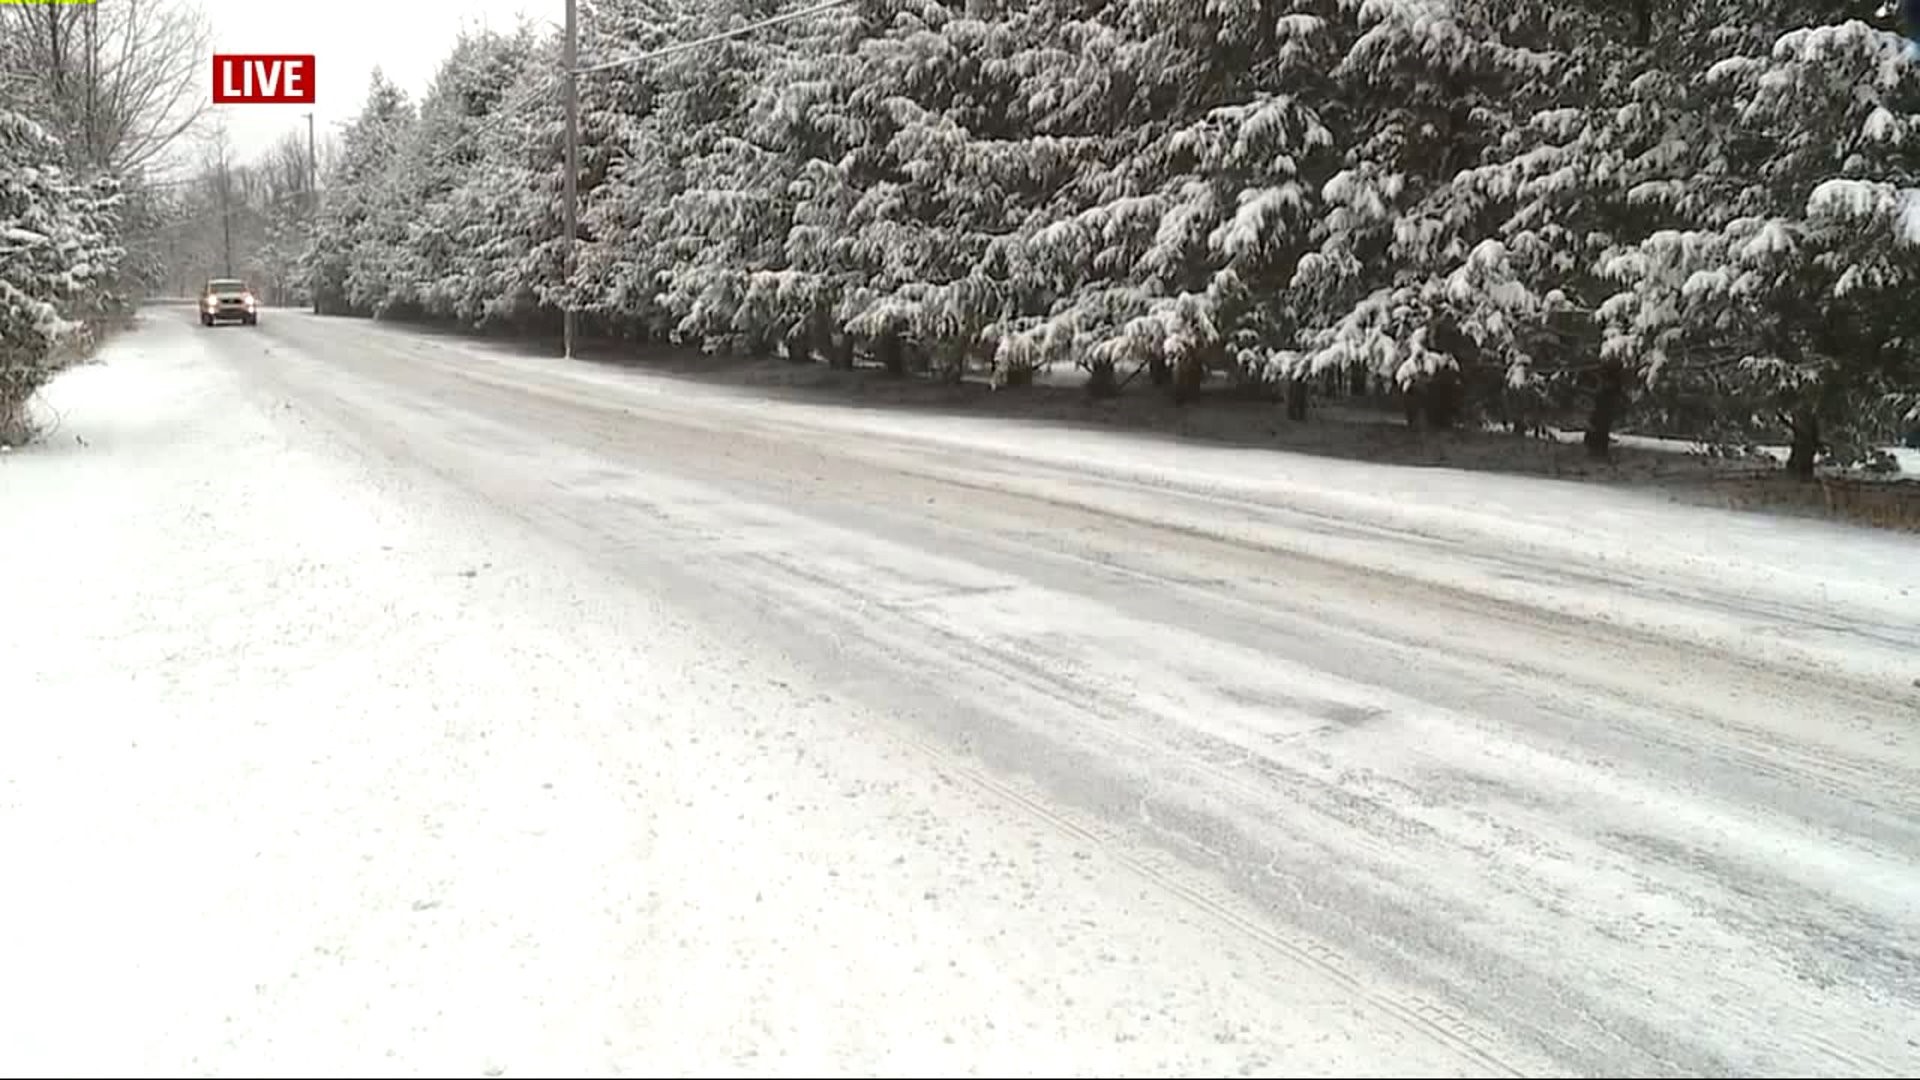 Road conditions in Lebanon County